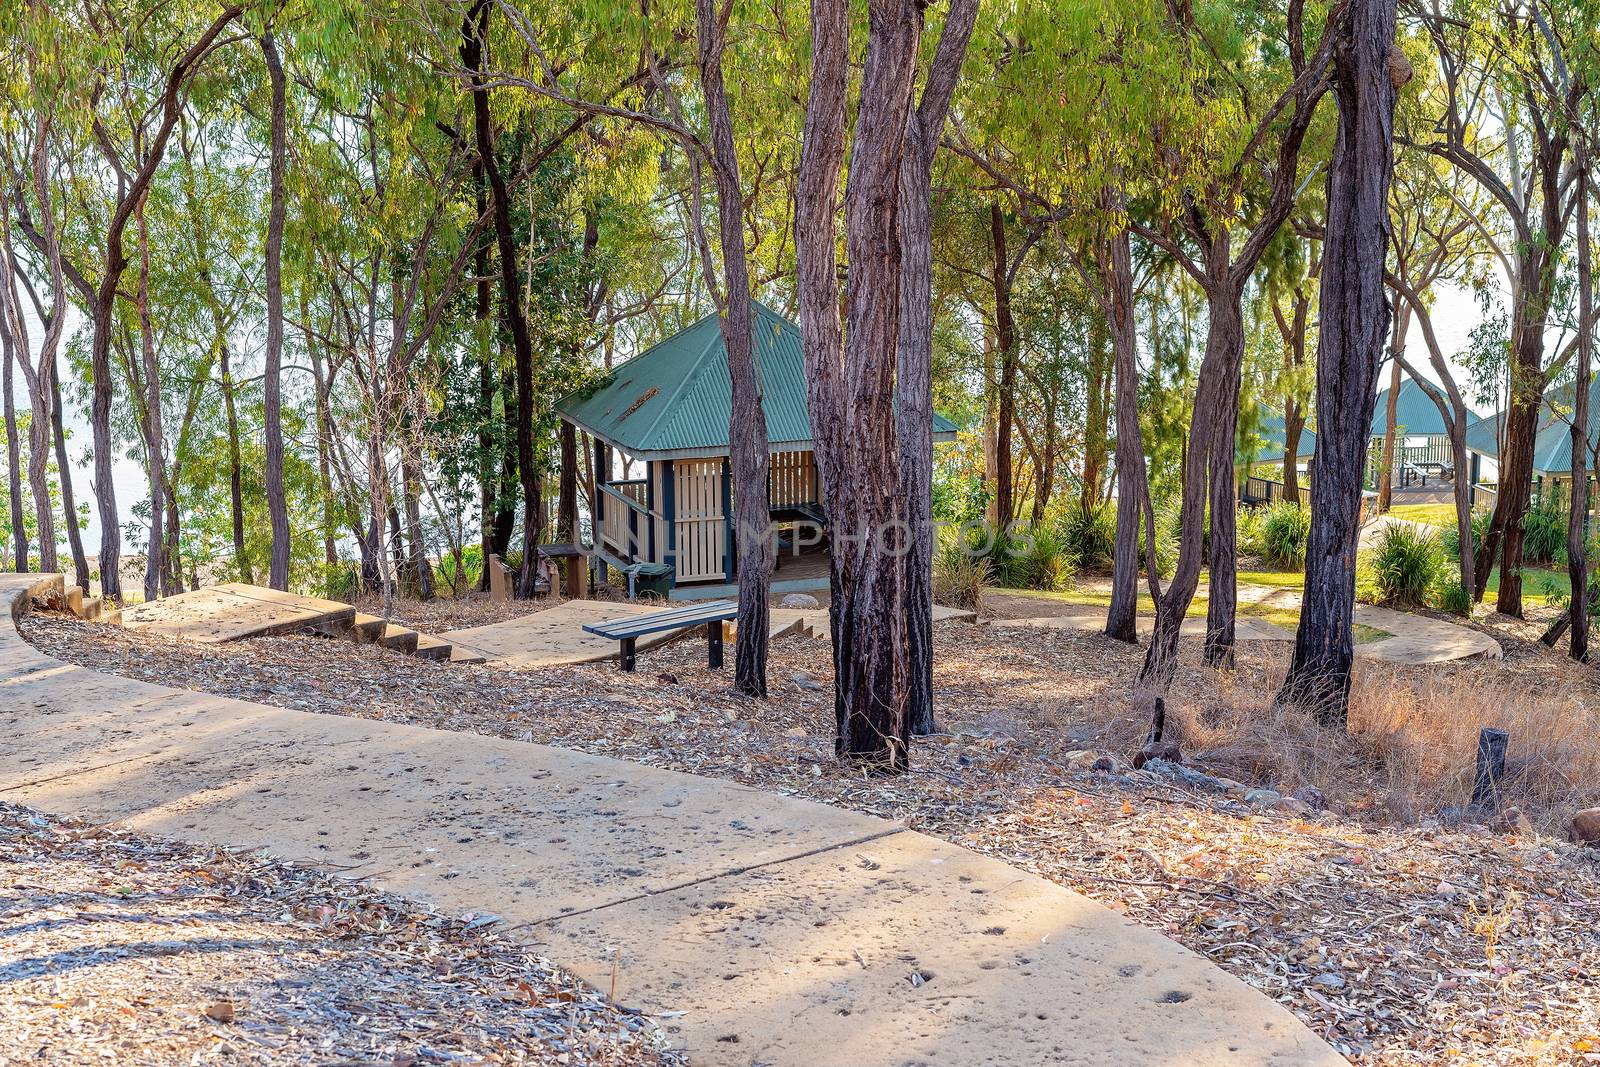 Shaded eating areas at a picturesque dam popular for recreational purposes